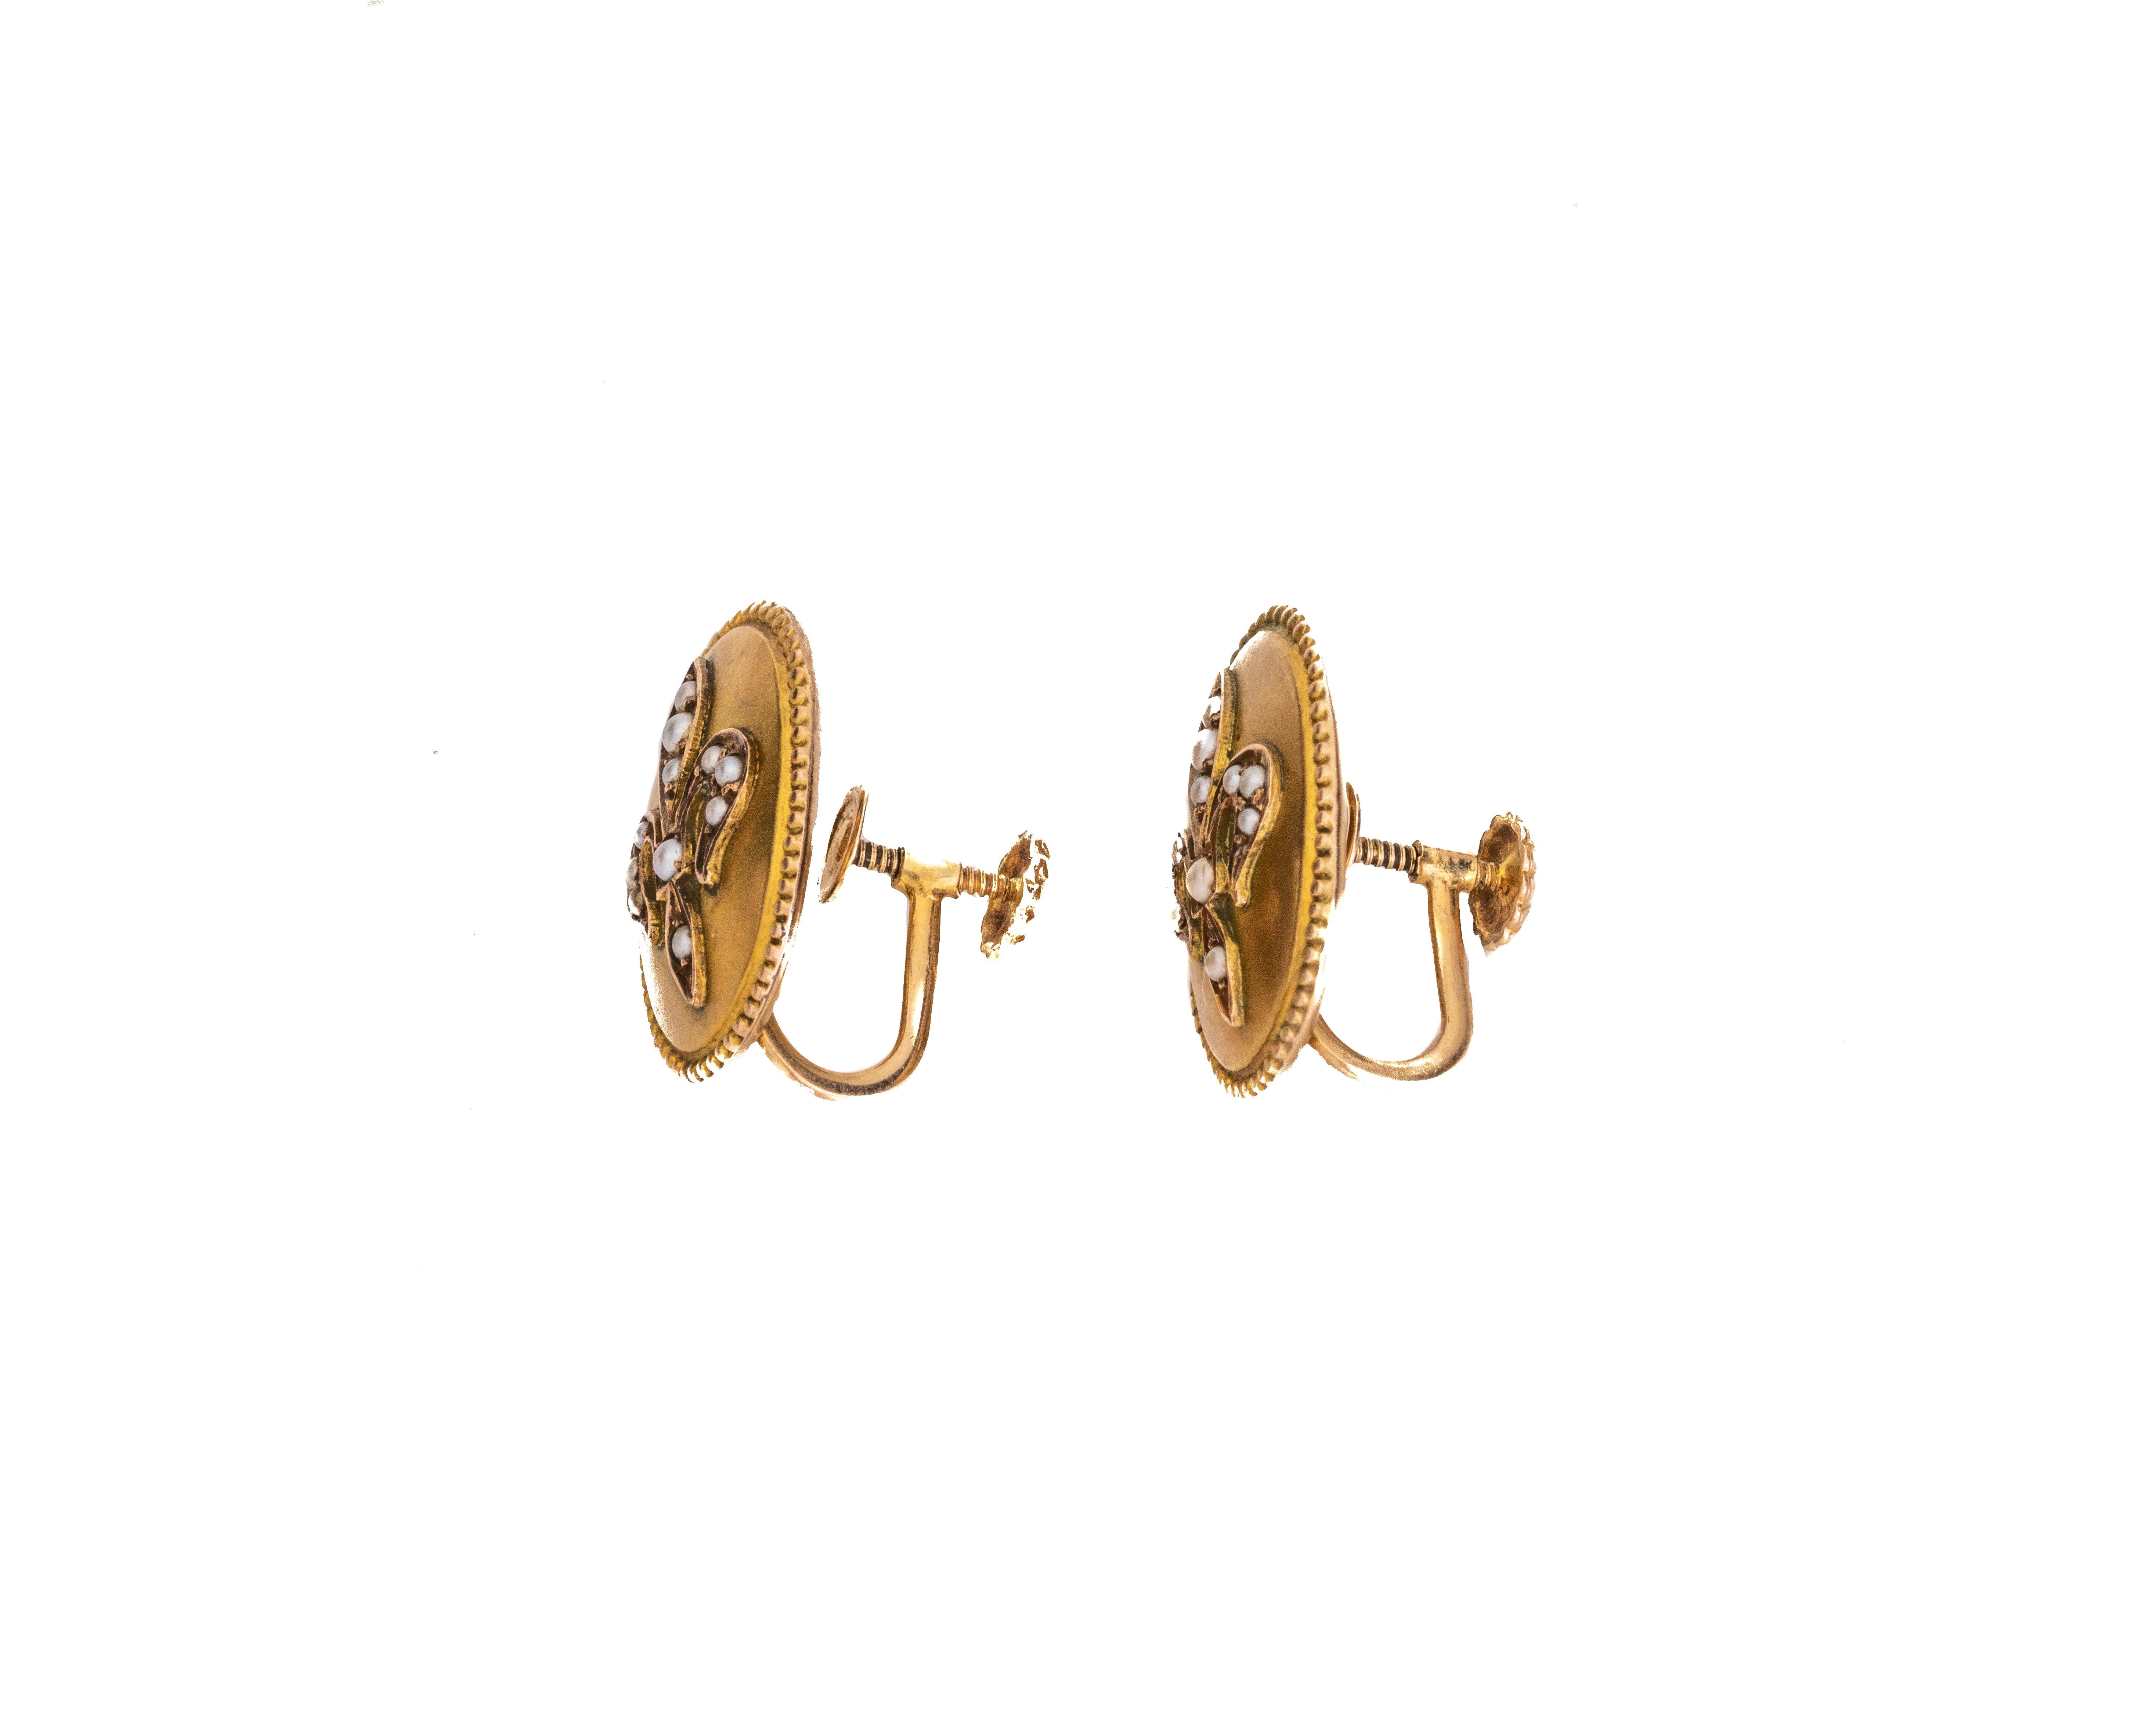 Earring Details:
Metal type: 14 karat Yellow Gold
Weight: 4 grams
Measures approximately 1 Inch in Height, Oval Shape

Features pearls in the fleur-de-lis design and a beautiful milgrain design border on the outer edge of the earrings. They are